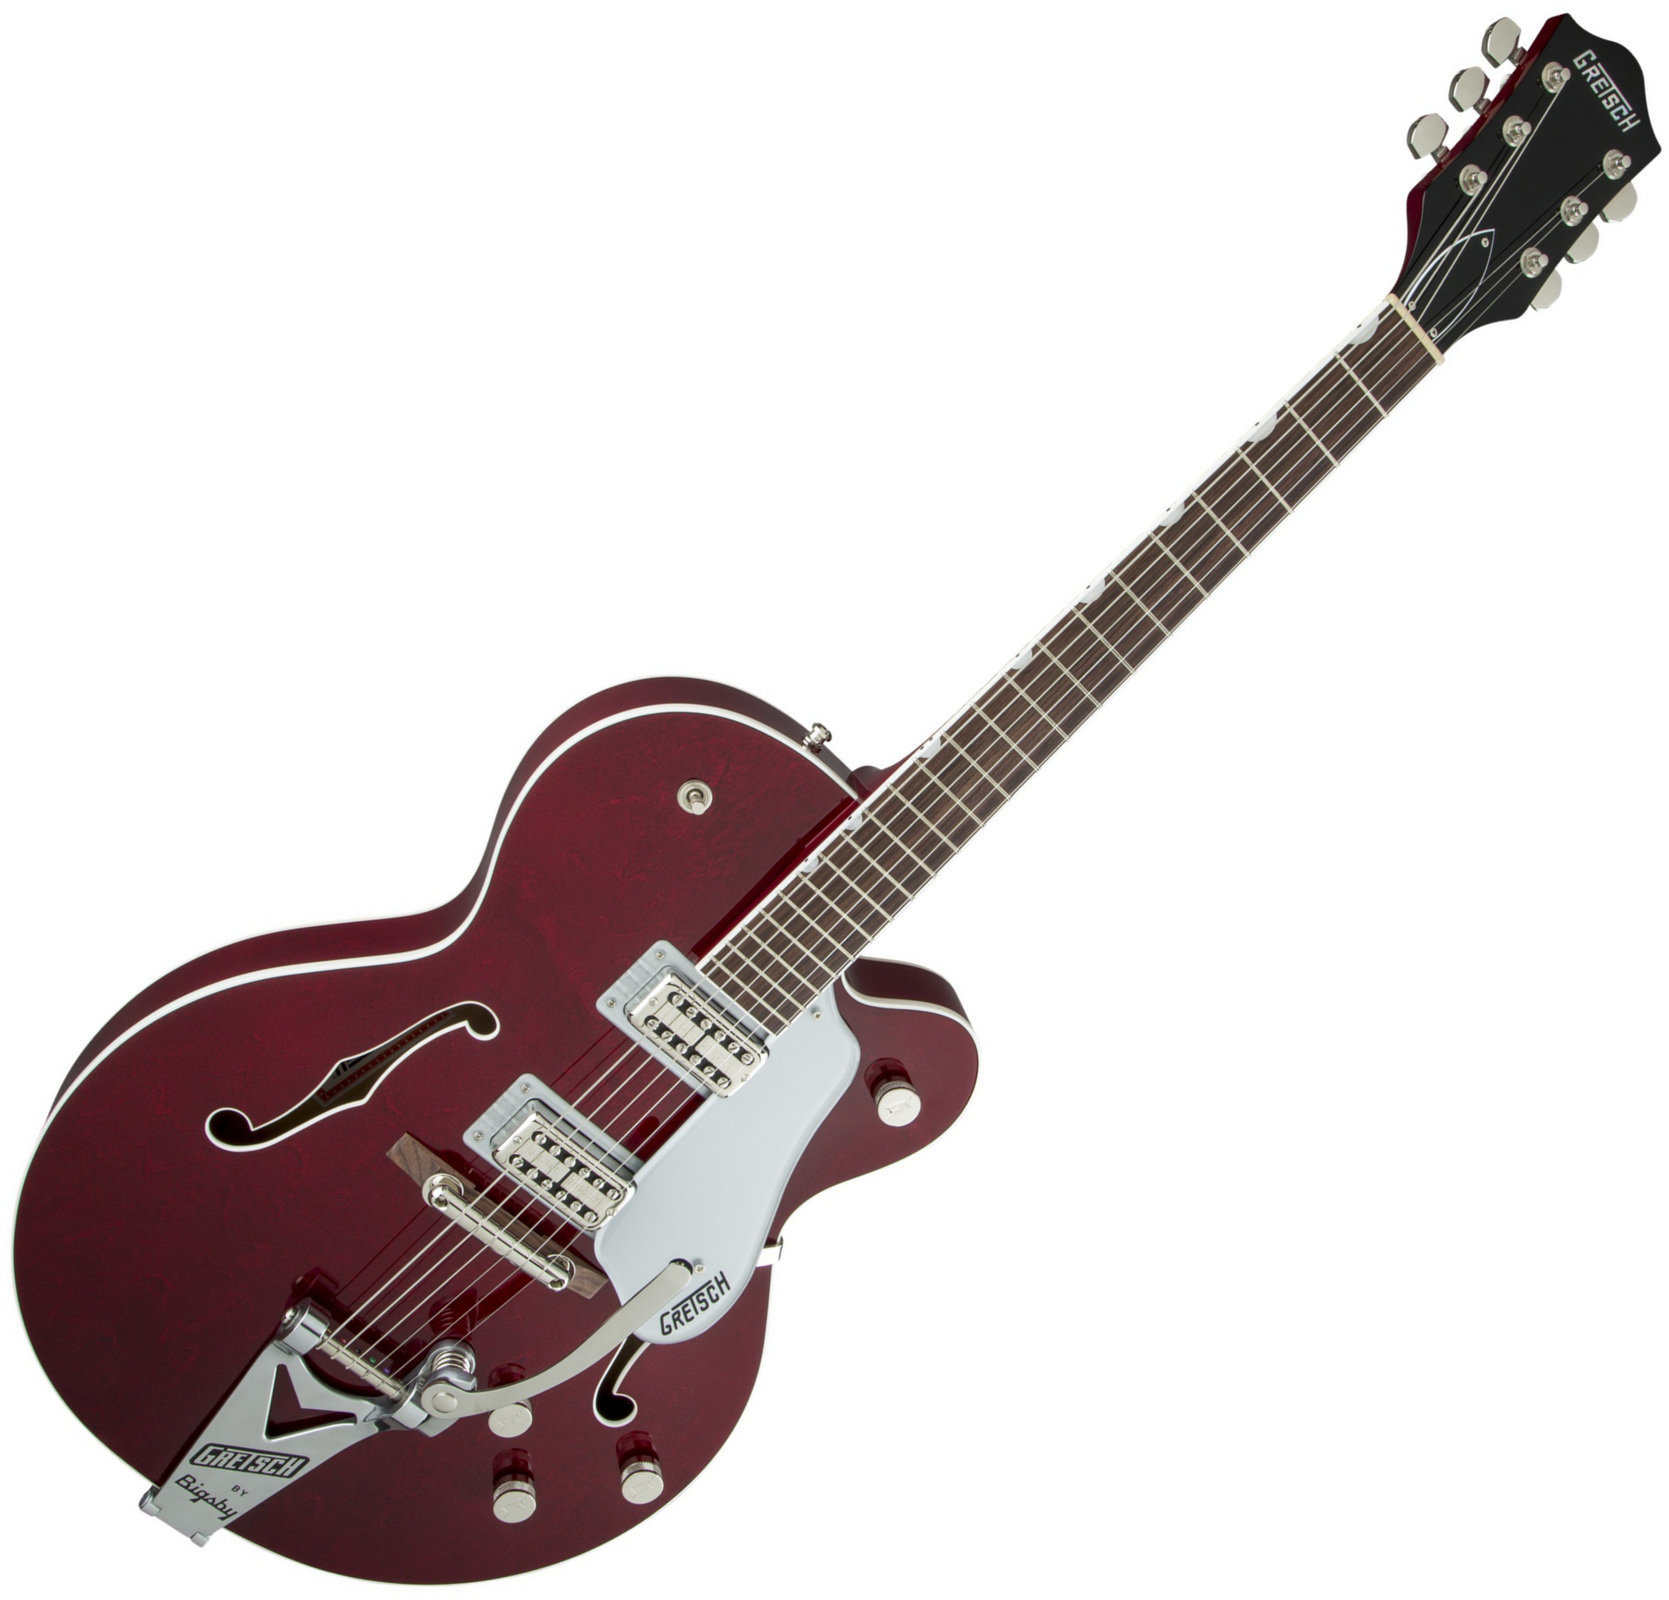 Semi-Acoustic Guitar Gretsch G6119 Professional Players Edition Tennessee Rose RW Dark Cherry Stain